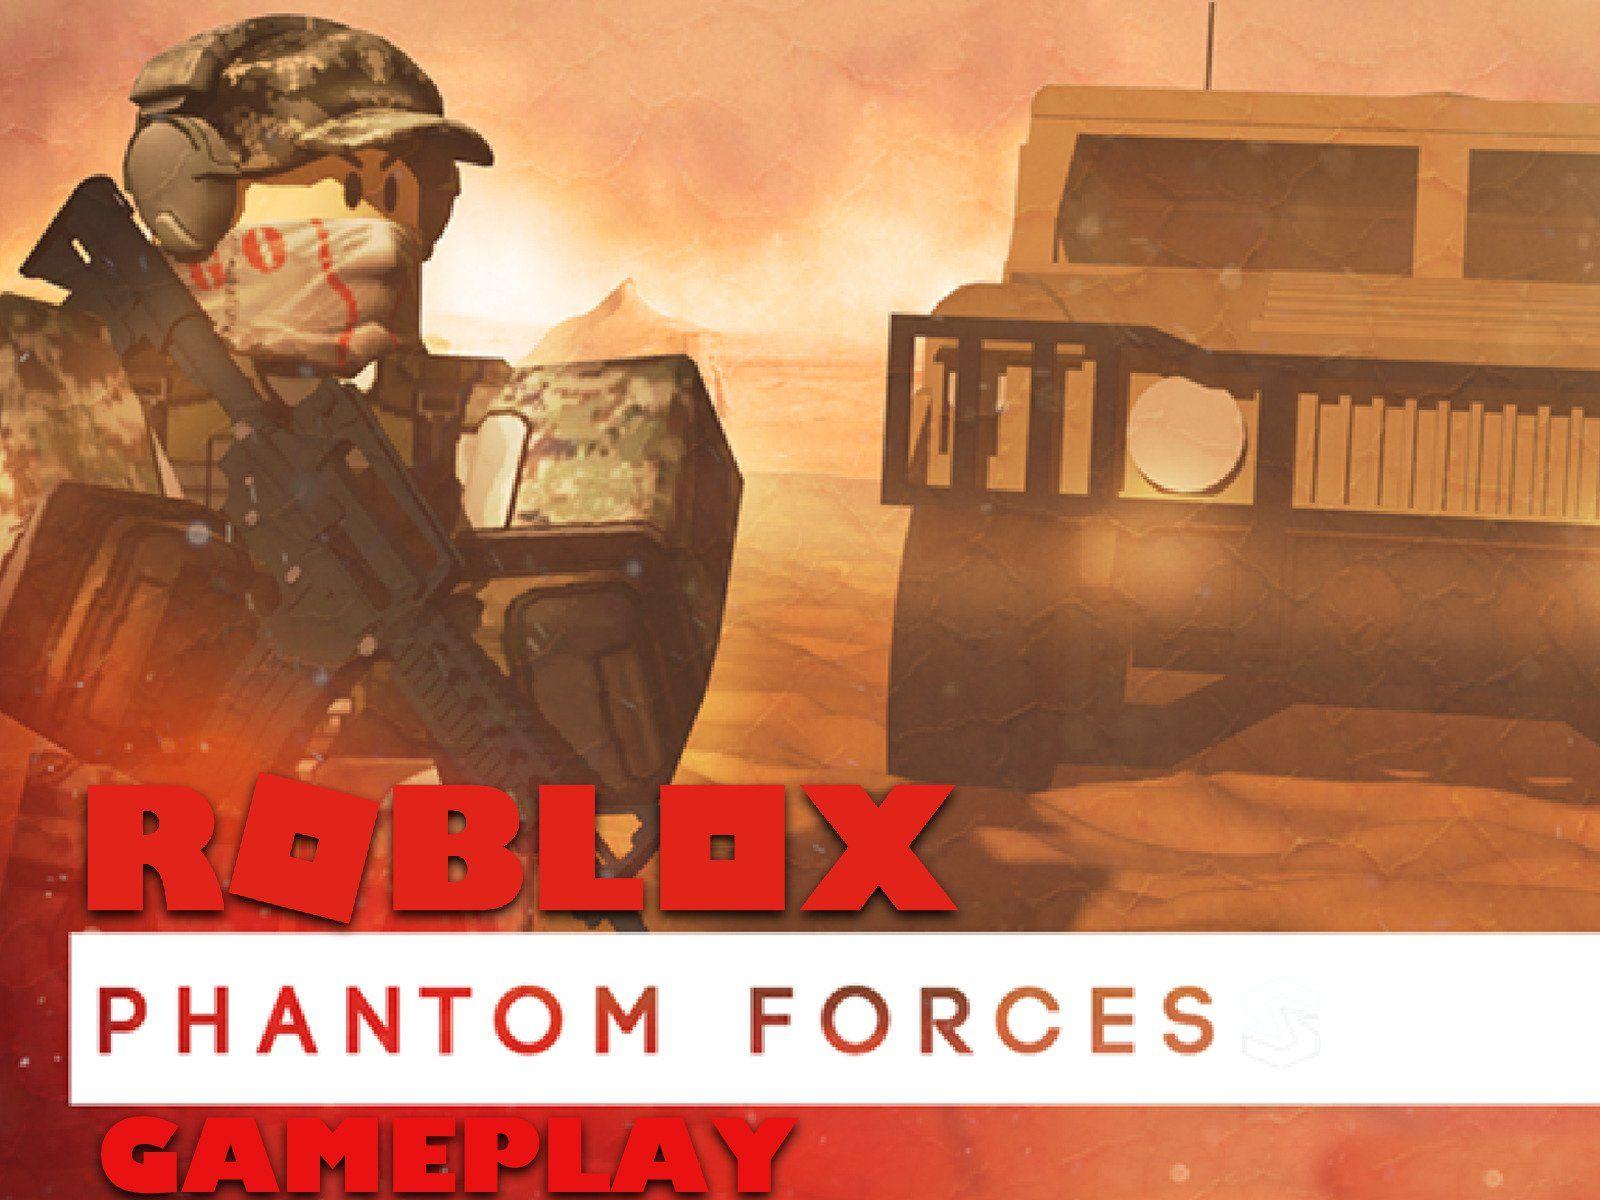 Robloxian Armed Forces Logo - Amazon.com: Watch Clip: Roblox Phantom Forces Gameplay | Prime Video